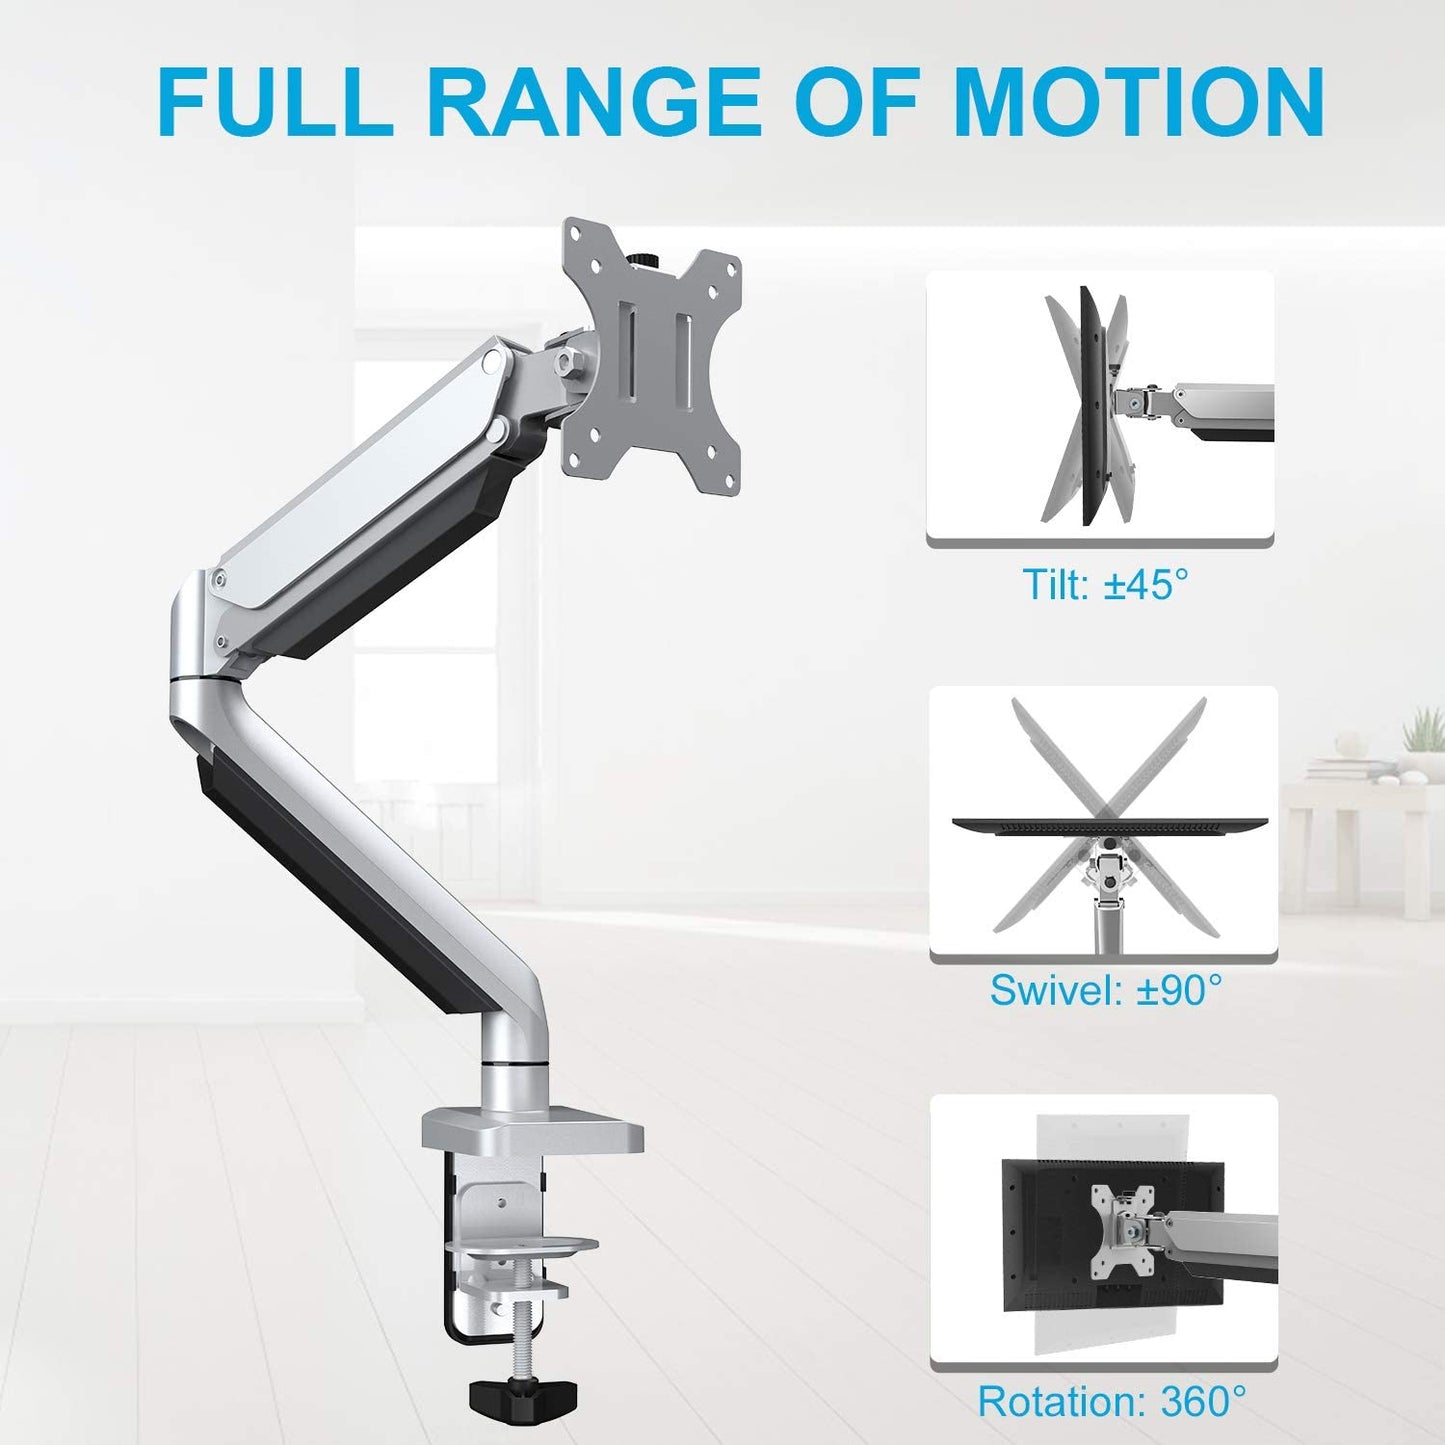 Single Arm monitor mount with full range of motion